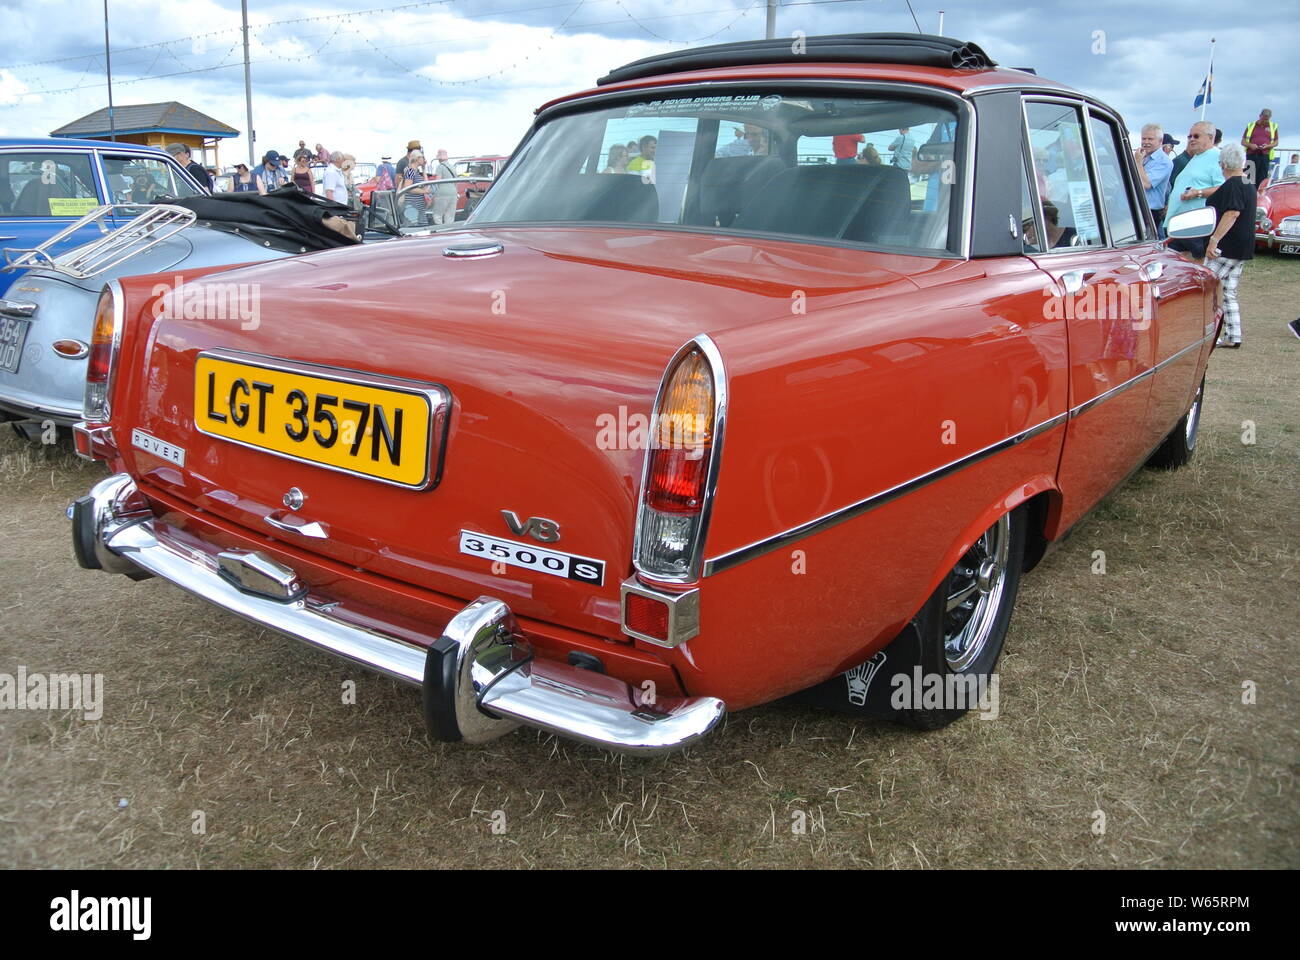 A 1975 Rover 3500S V8 parked up on display at the Riviera classic car show, Paignton, Devon, England, UK. Stock Photo